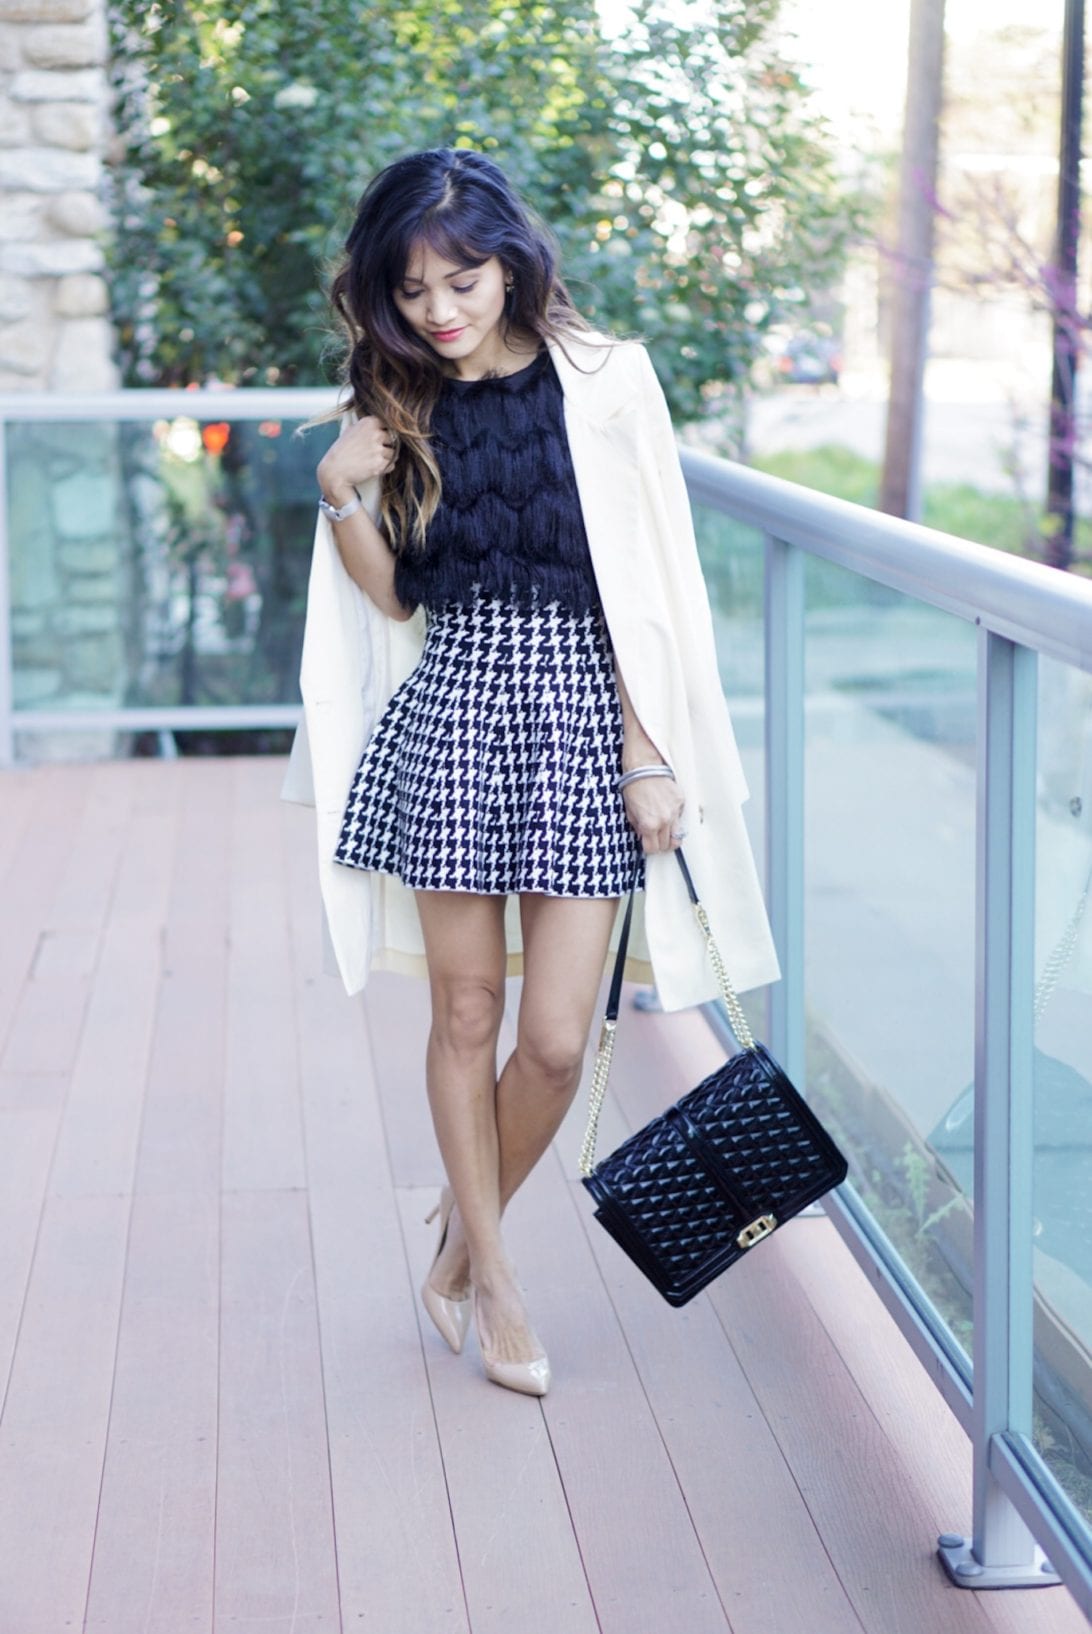 20 Easy Tips for the Best Instagram Post by Houston fashion blogger Dawn P. Darnell - blazer, houndstooth skirt, love cross body bag, nude pumps